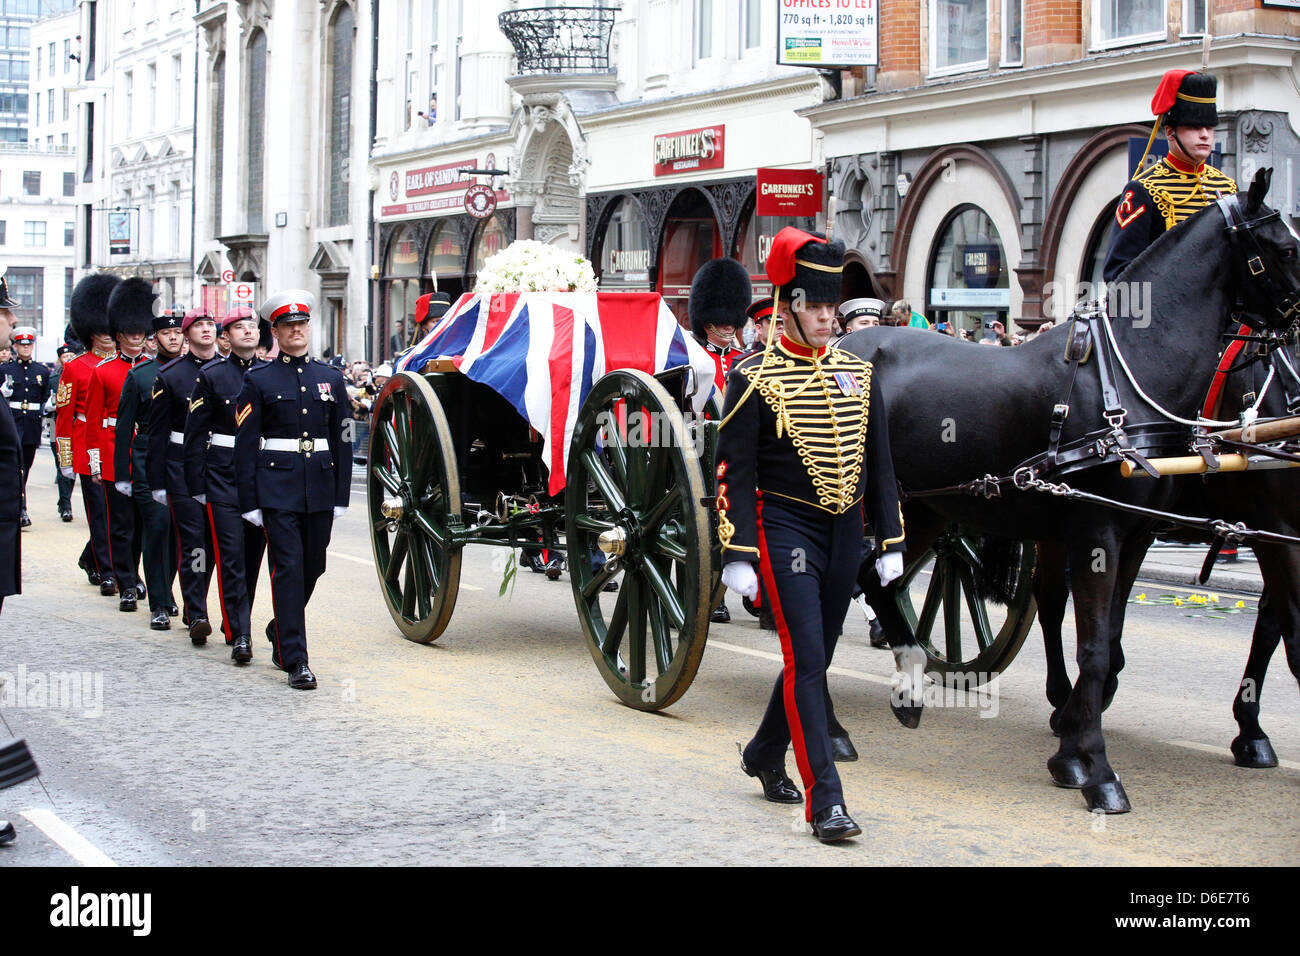 LONDON 17th of April 2013, The funeral of former prime minister Margaret Thatcher was held at St. Paul's Cathedral this morning. Coffin of Margaret Thatcher arriving at St. Paul's Cathedral on a gun carriage drawn by the King's Troop Royal Horse Artillery. Stock Photo